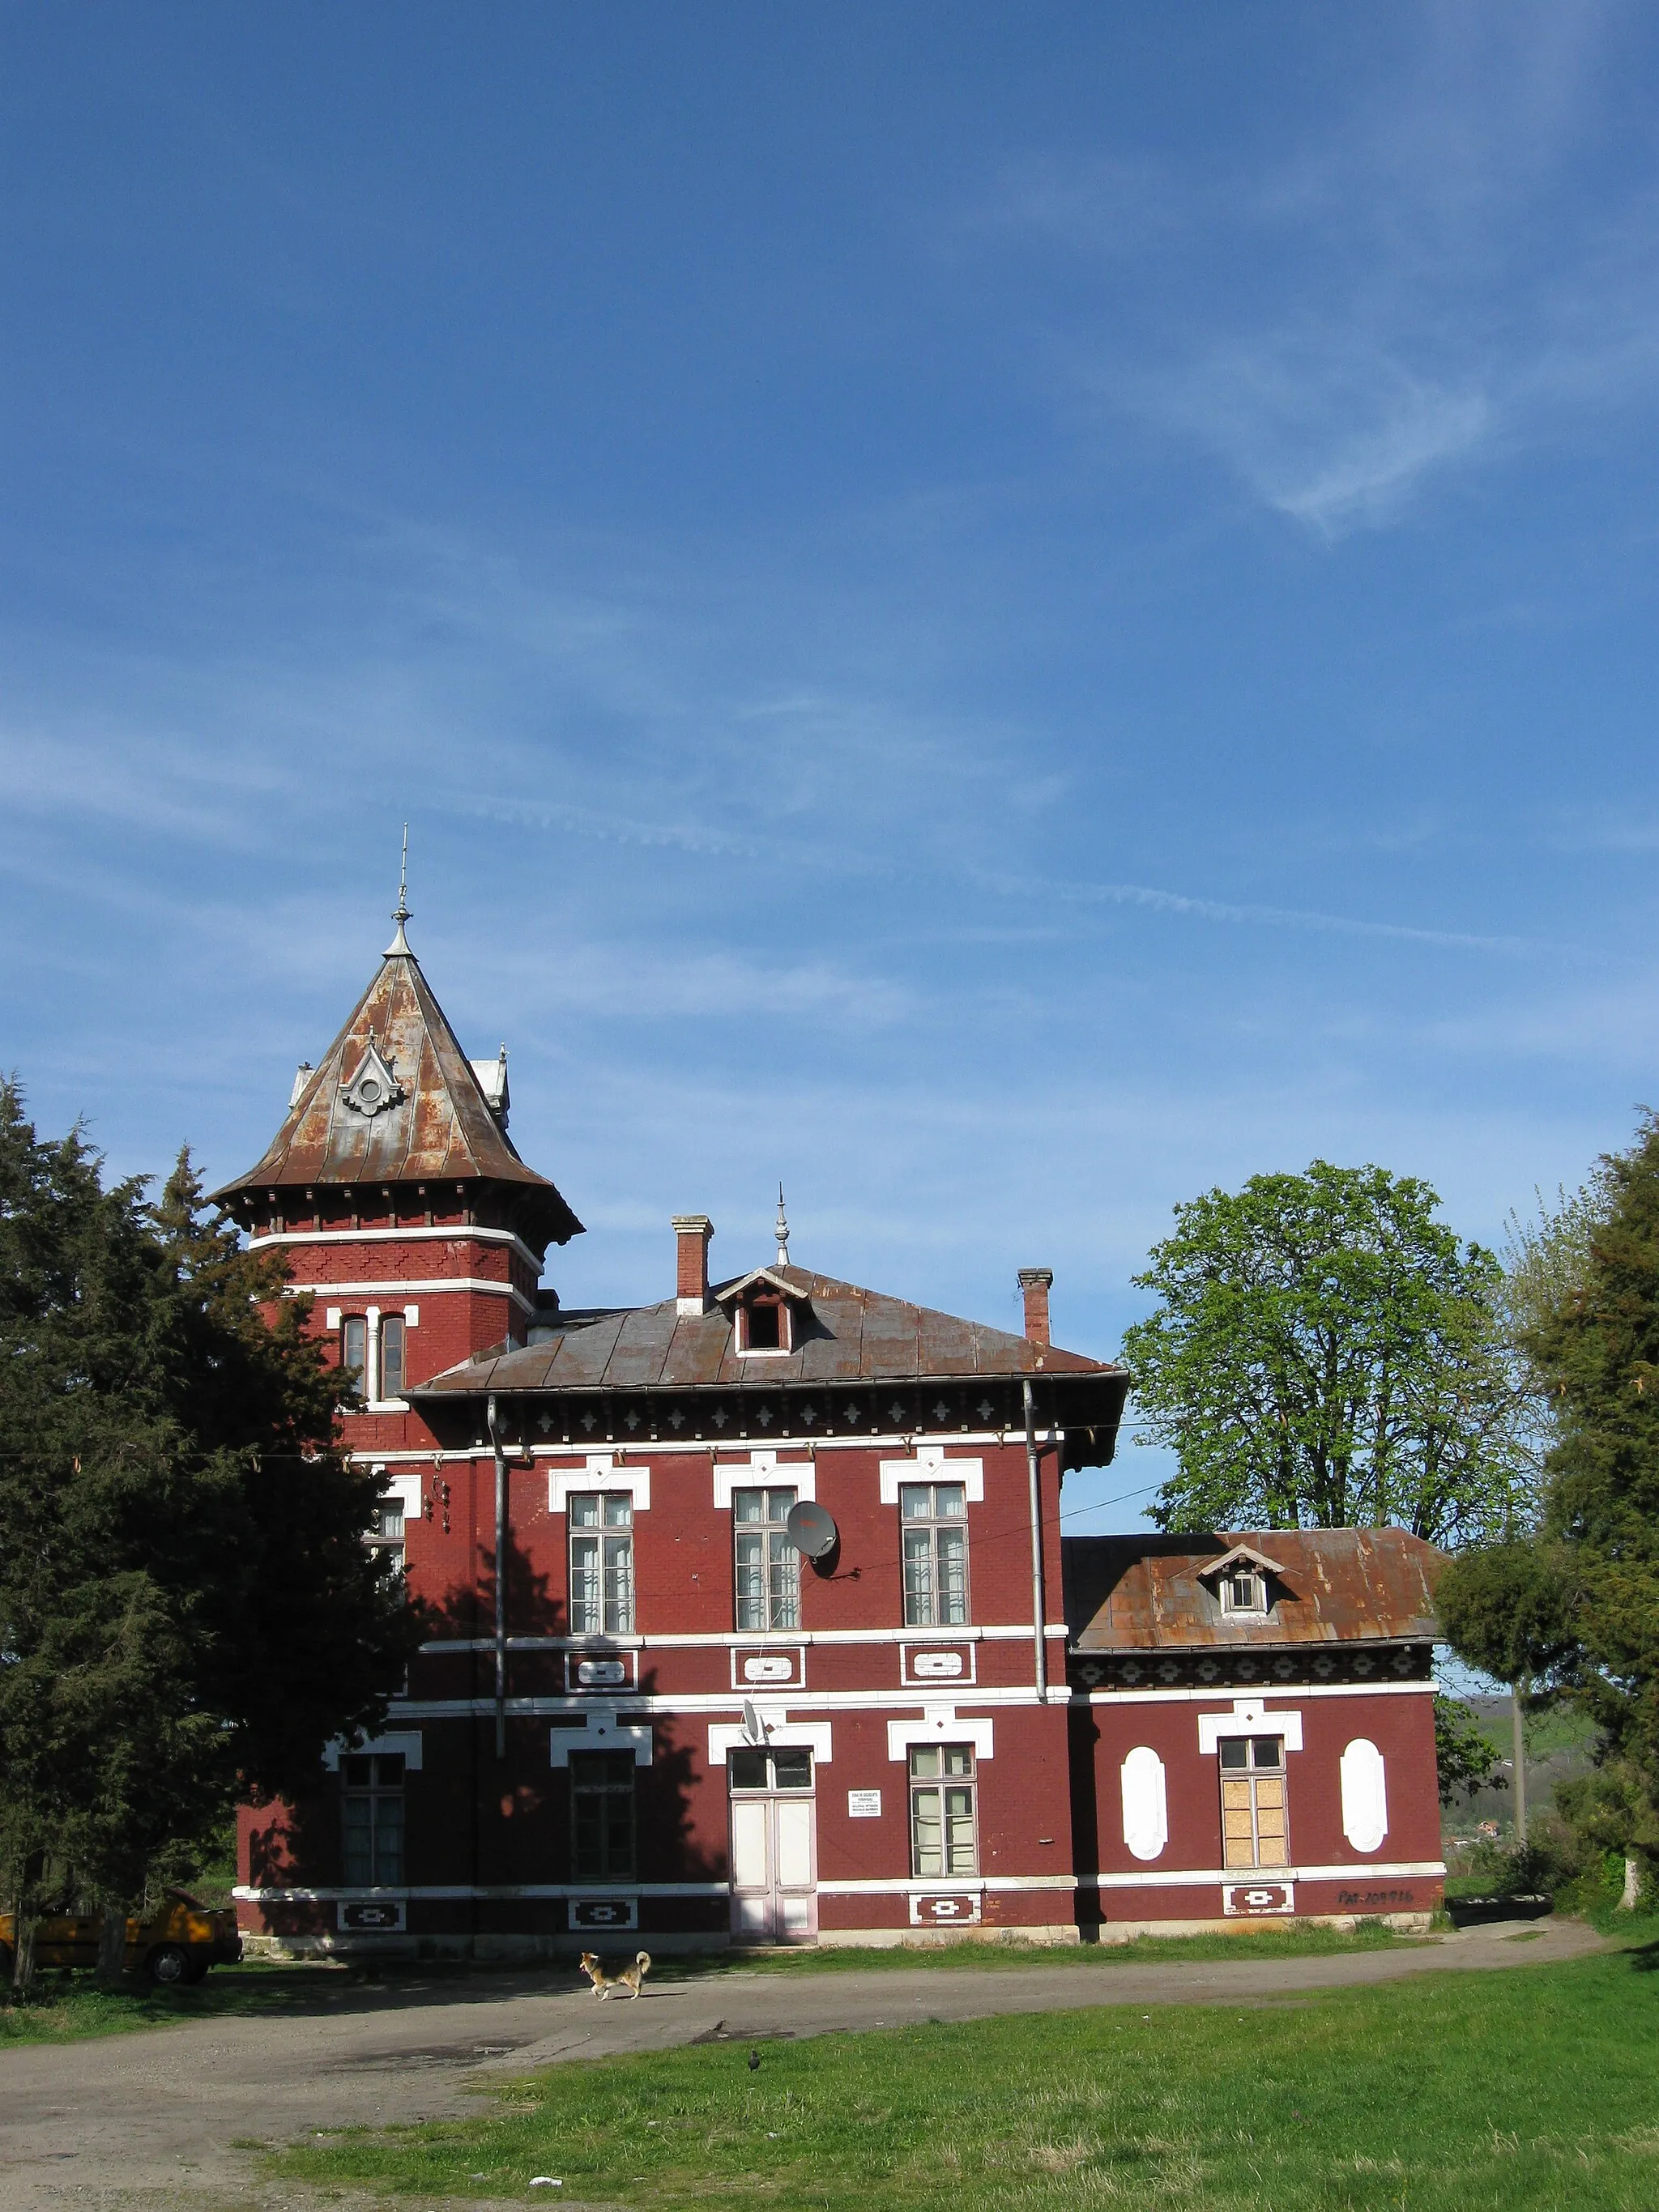 Photo showing: Photograph of the Romanian Railways station in Merişani, Argeş County, taken from the west side. Building based on French model and erected by the Romanian state in 1898, in tandem with all other stations on the Curtea de Argeş-Piteşti line (with which it shares the basic design). One of the earliest railway building projects in Romania, architect(s) uncredited. See: Adriana Gândilă, "Salvaţi Calea Ferată Piteşti - Curtea de Argeş!", in Jurnalul de Argeş, November 11, 2010.